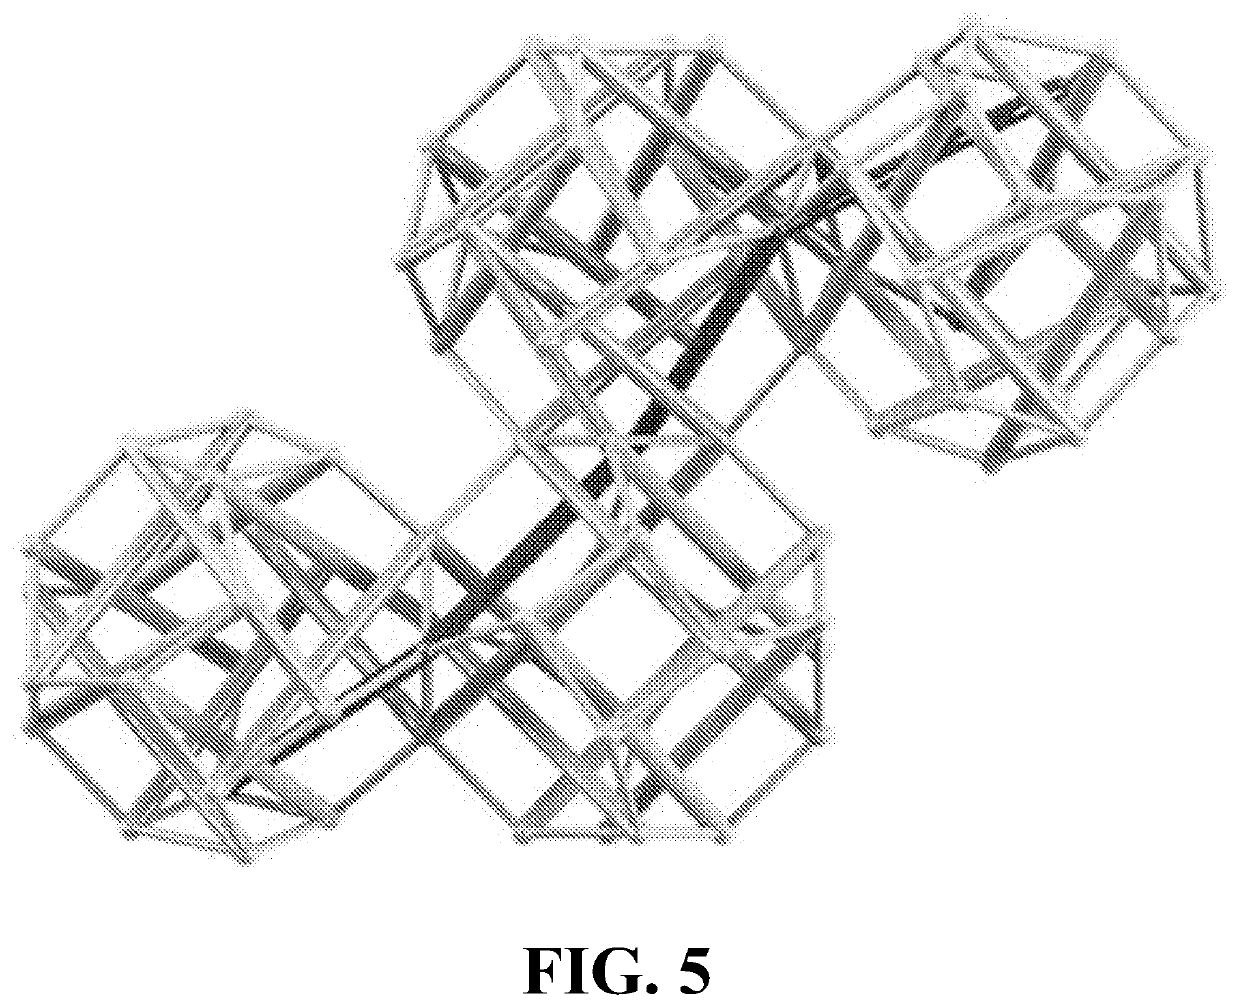 Tensegrity structures and methods of constructing tensegrity structures